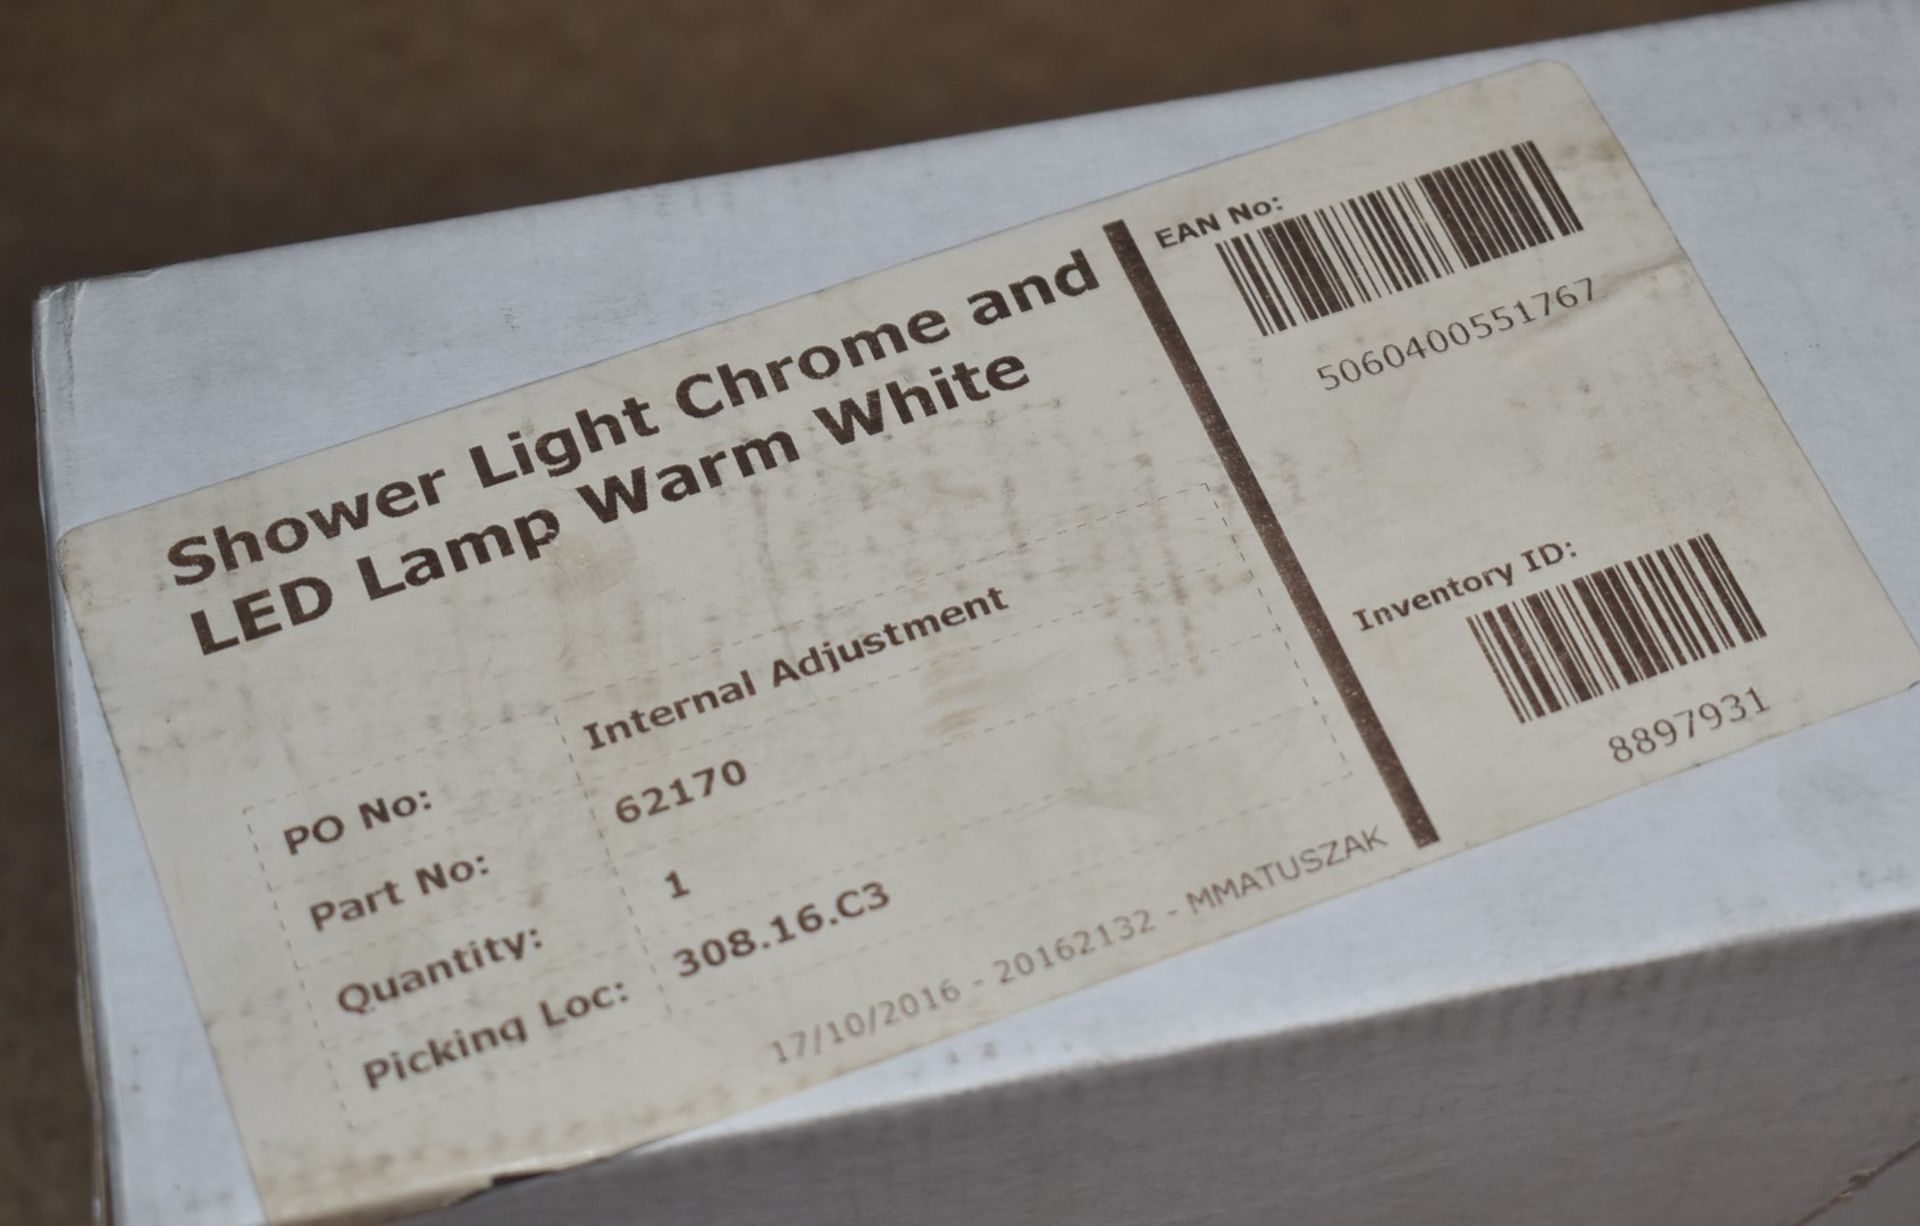 1 x Chrome Shower Light With Warm White LED Lamp - Unused Boxed Stock - CL011 - Ref: 62170 - - Image 3 of 3